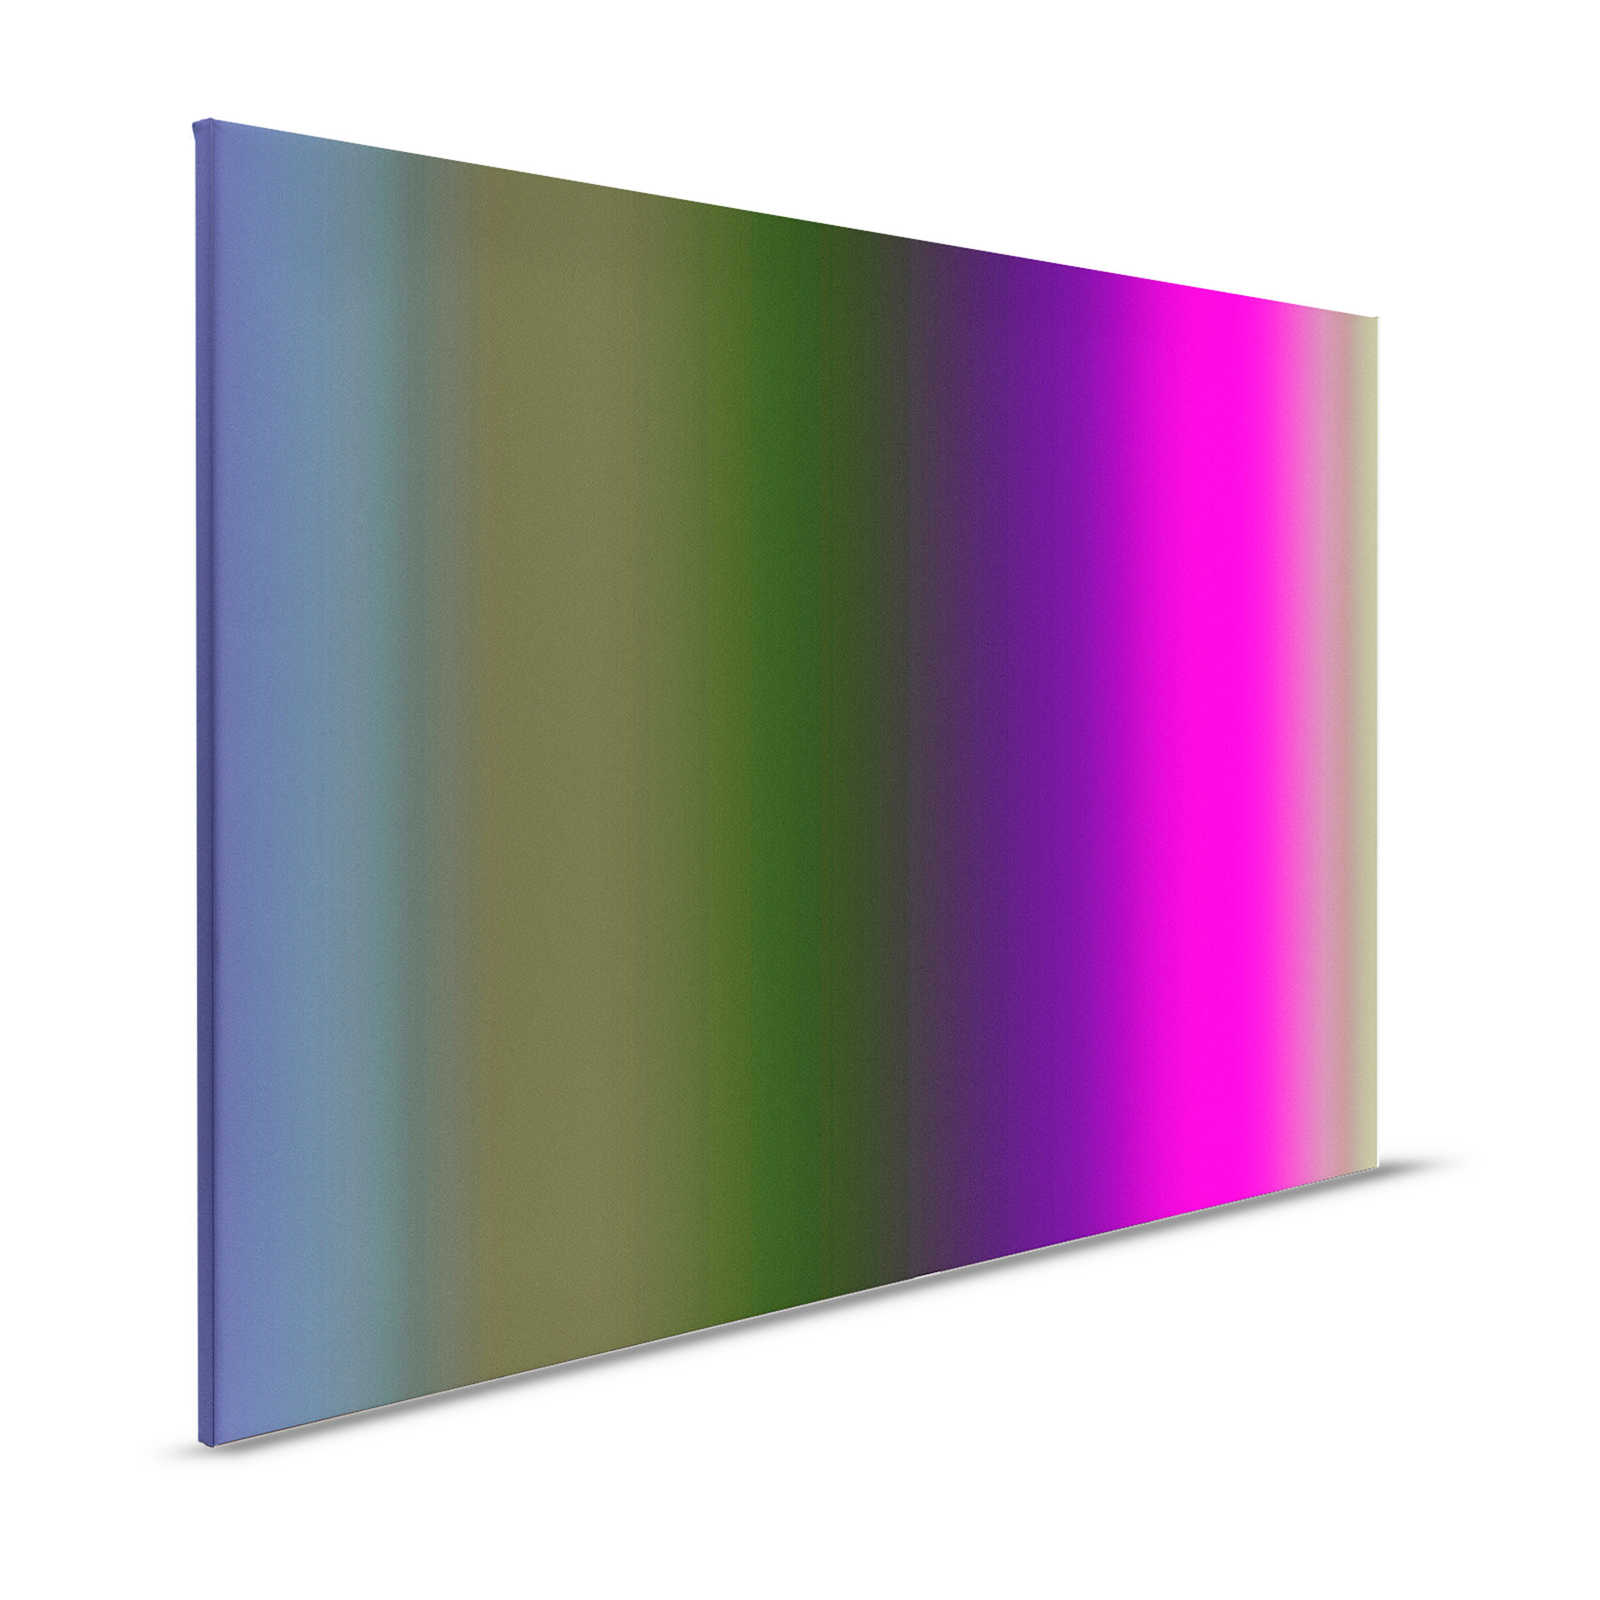 Over the Rainbow 3 - Canvas painting variegated colour spectrum with neon pink - 1,20 m x 0,80 m
